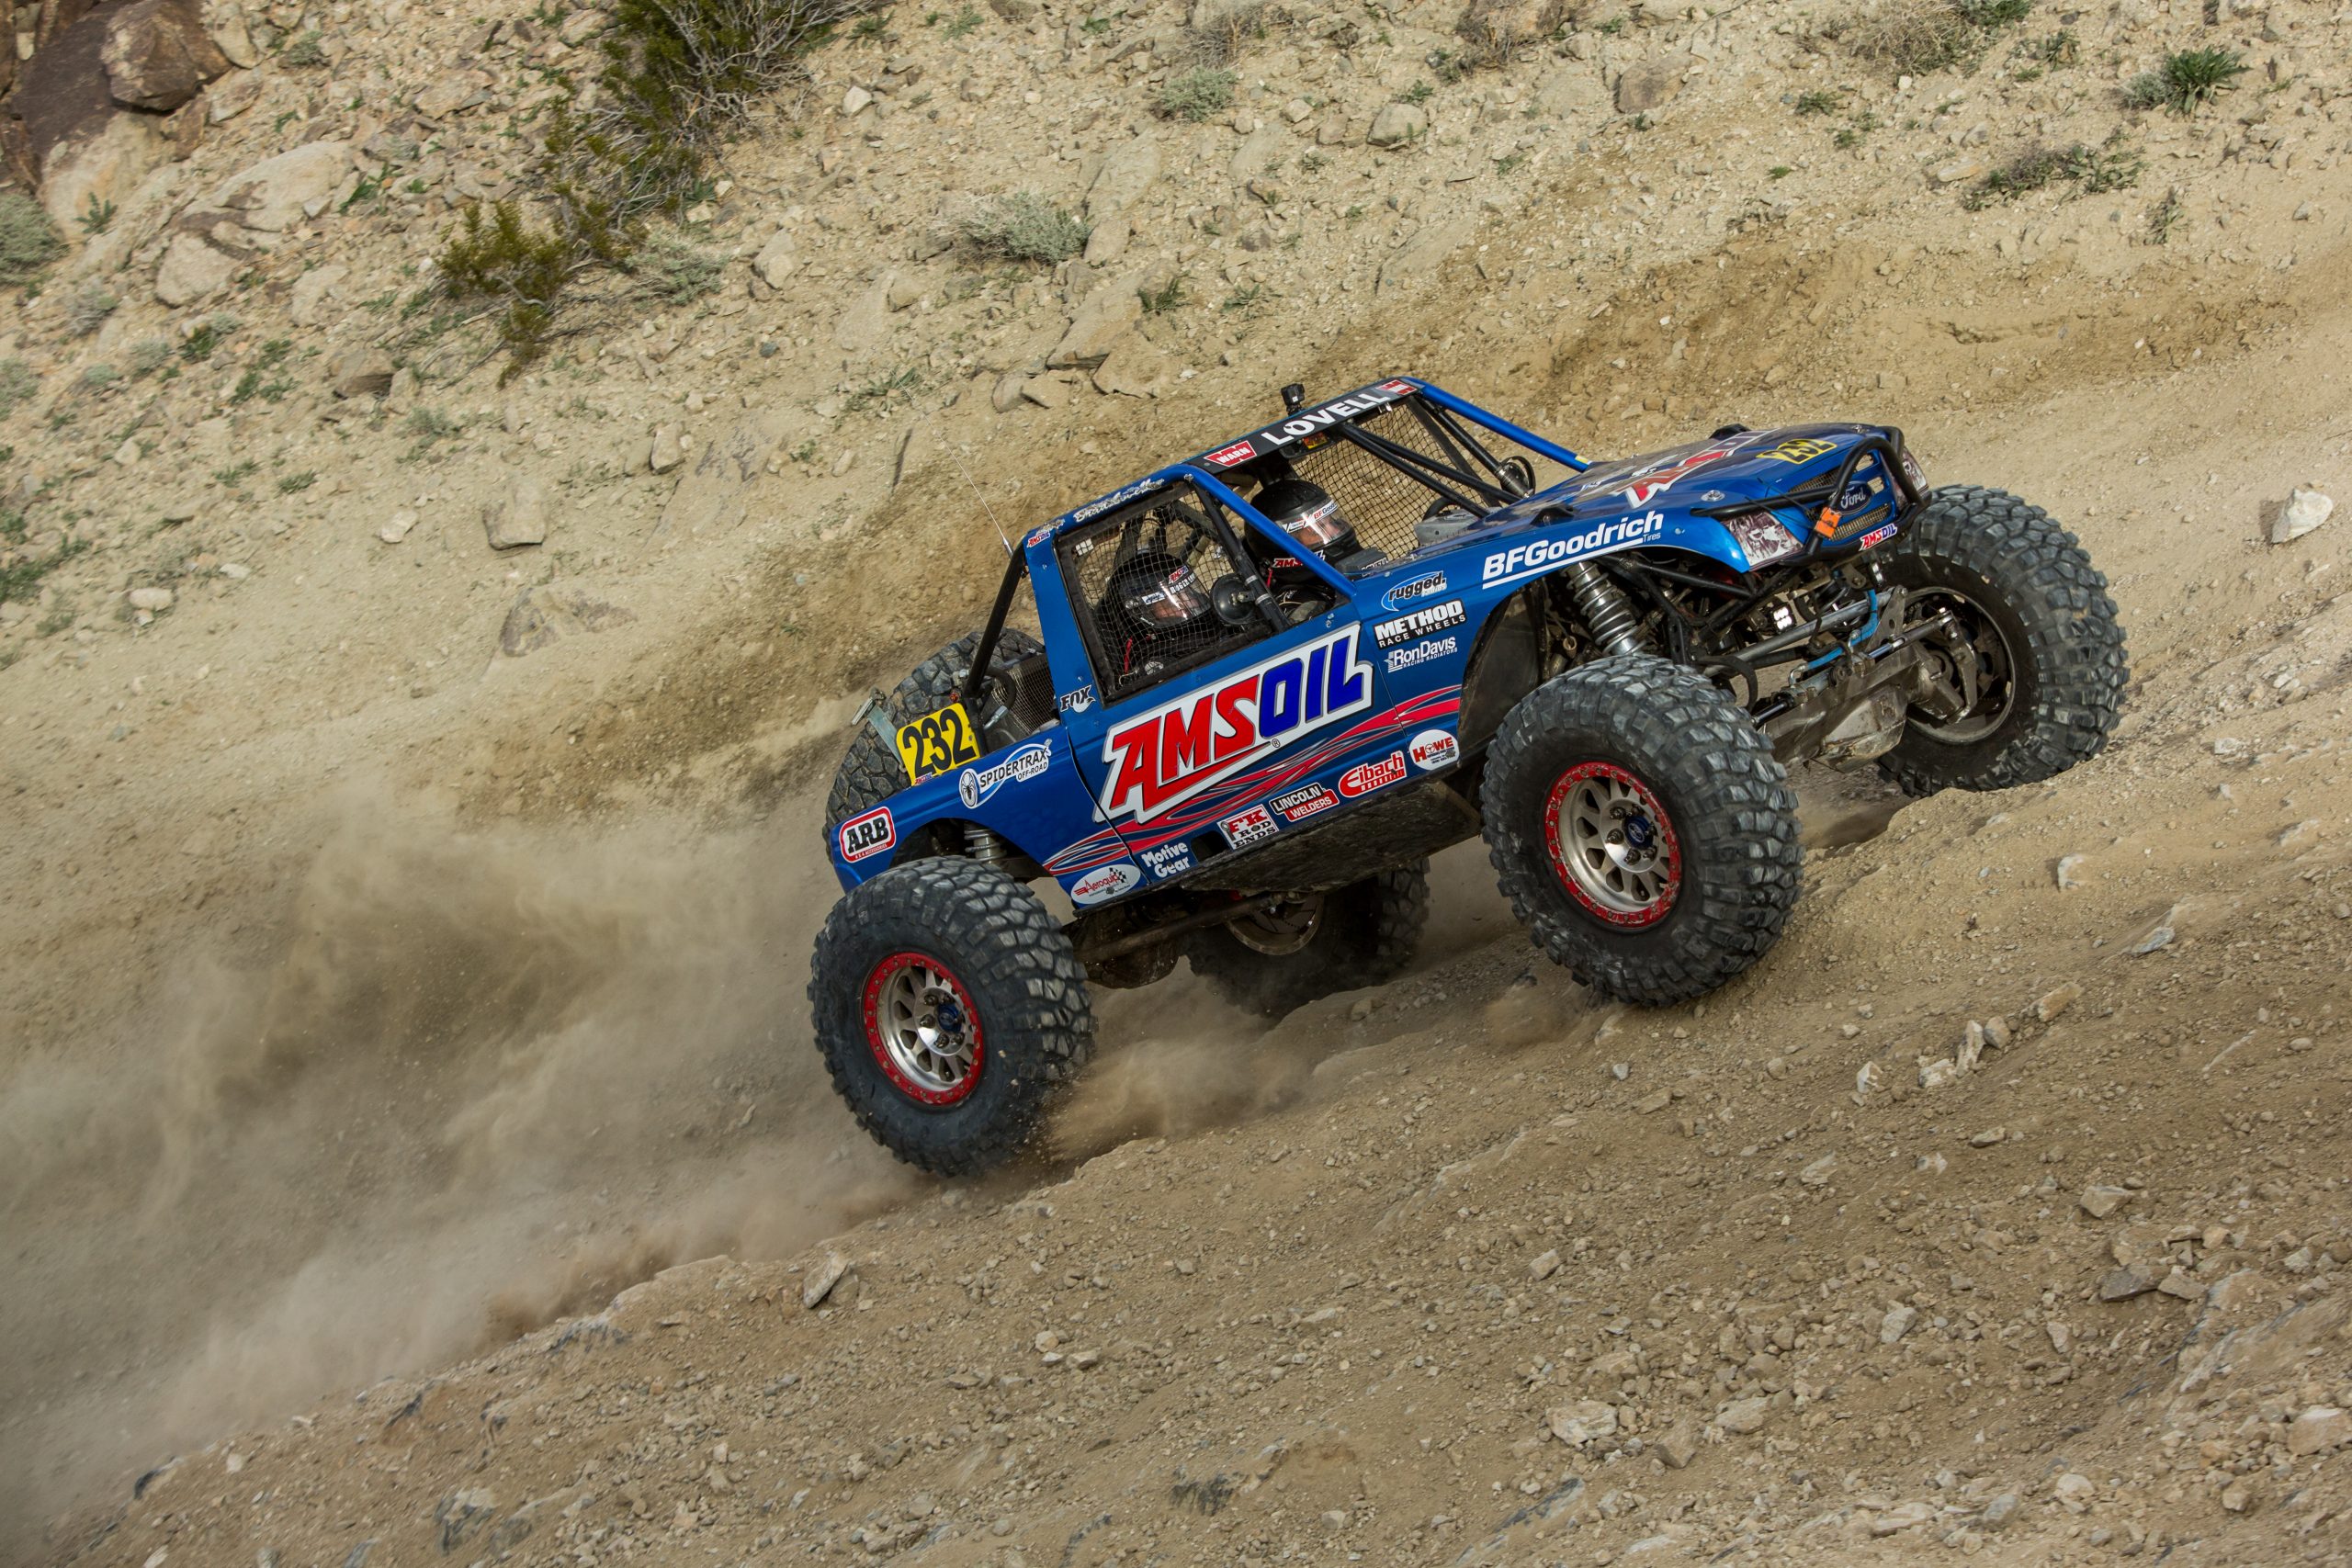 The “New Normal” Means a New Off-Season for Team AMSOIL